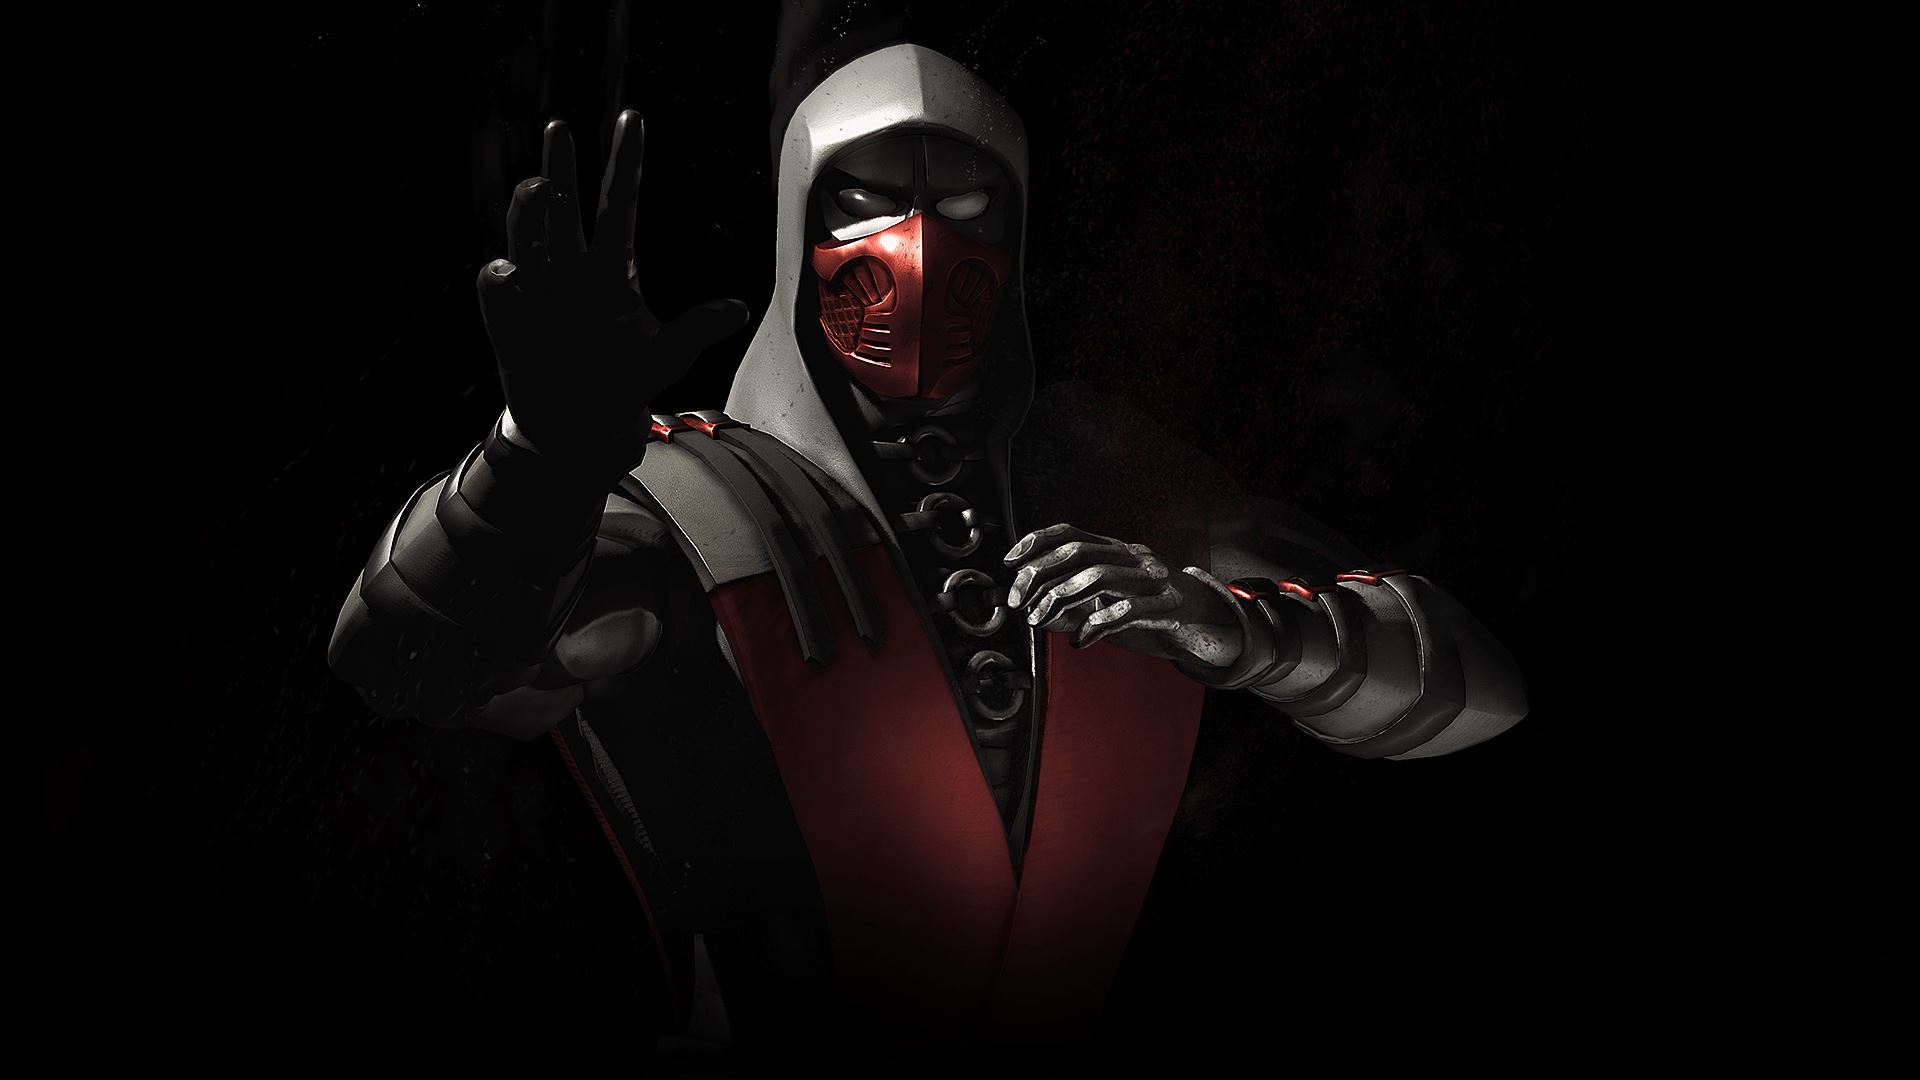 Ermac 4K wallpaper for your desktop or mobile screen free and easy to download